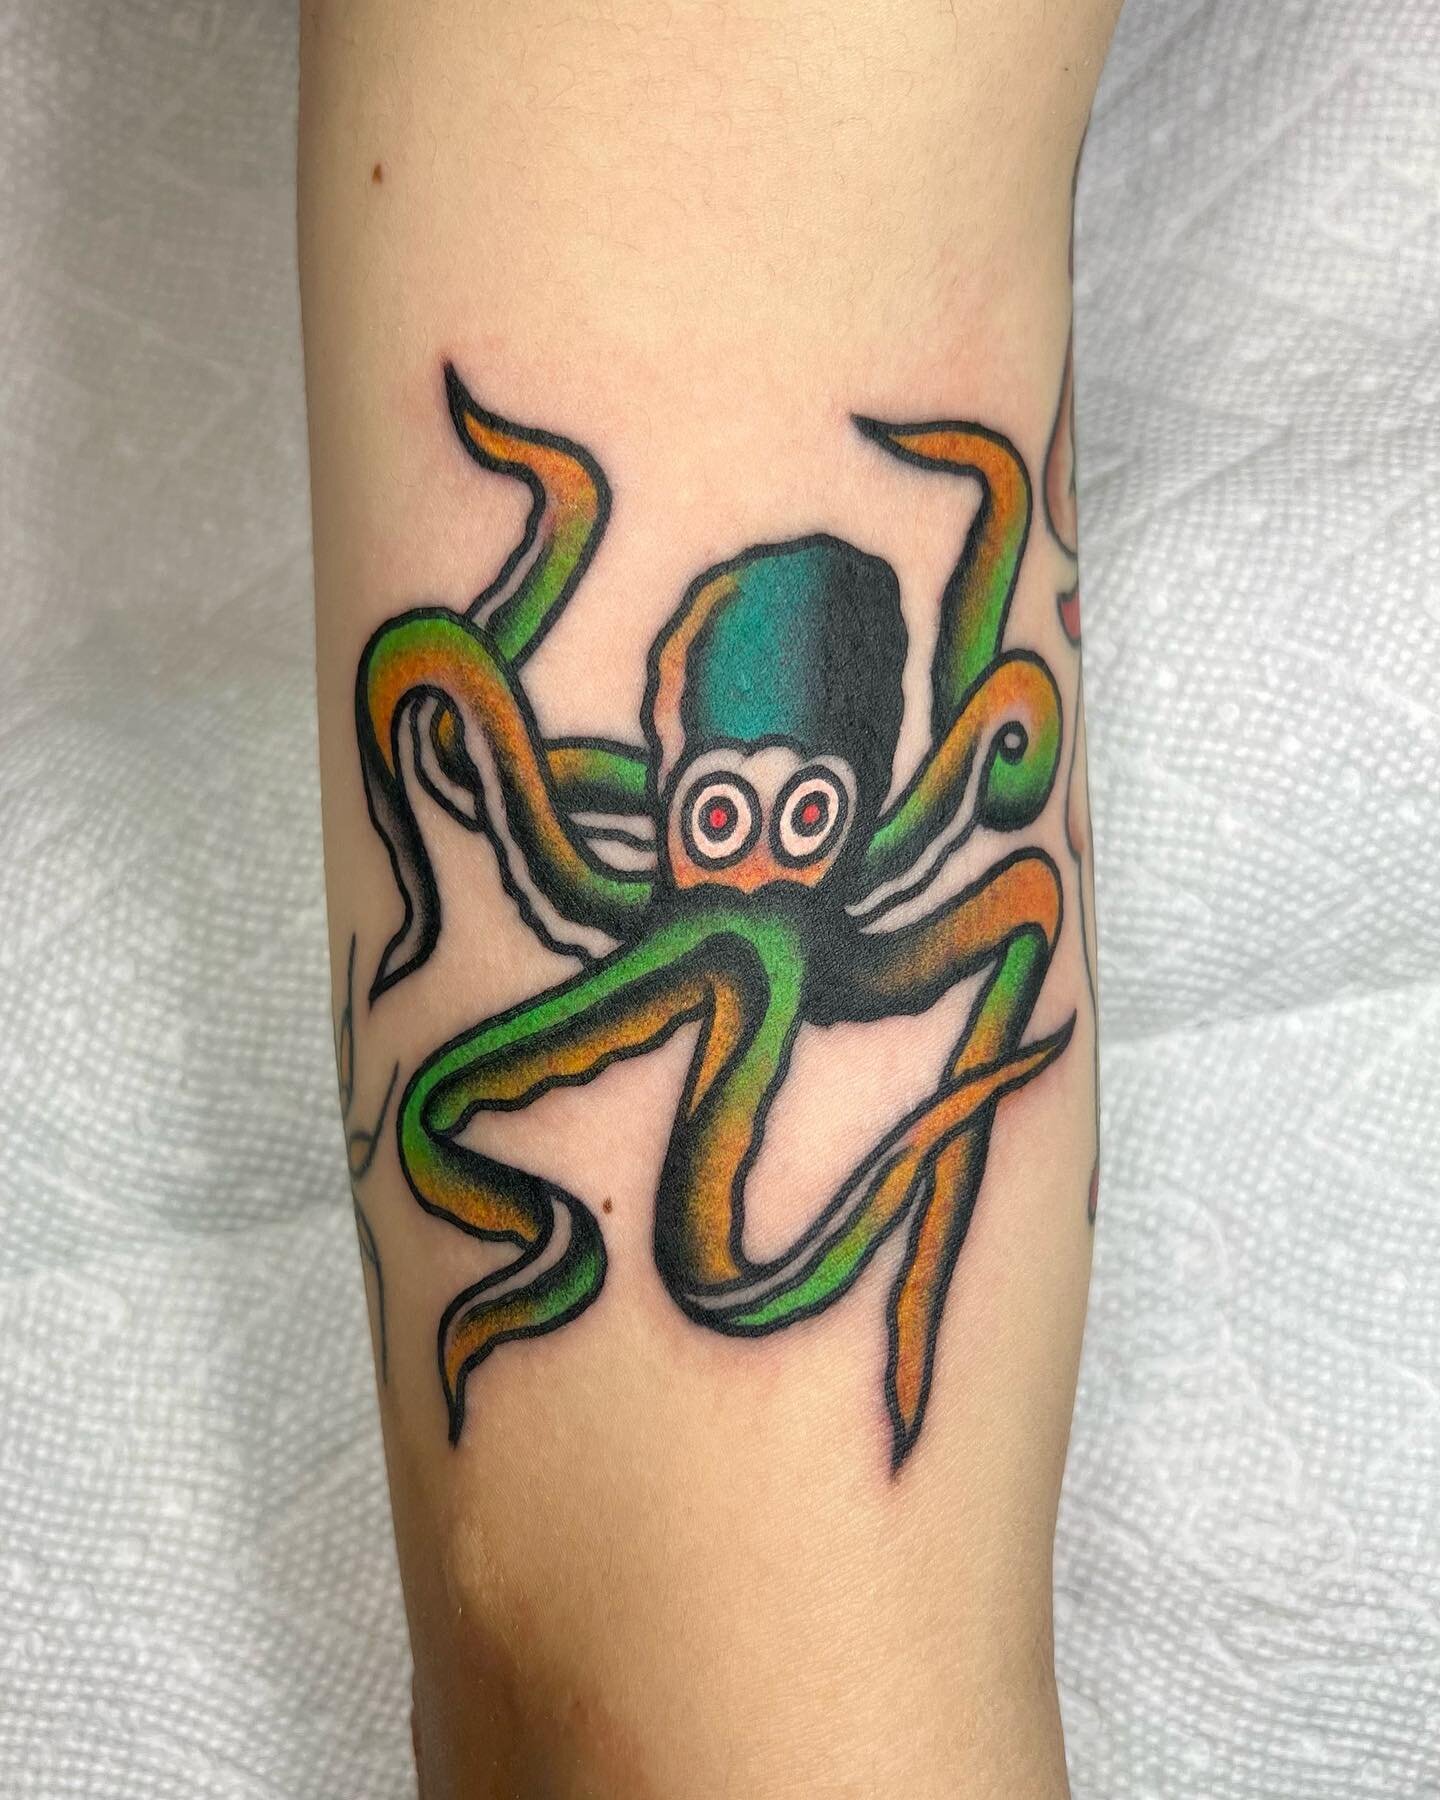 Lieber Octopus for Justin, thanks for looking. @victorytattooing